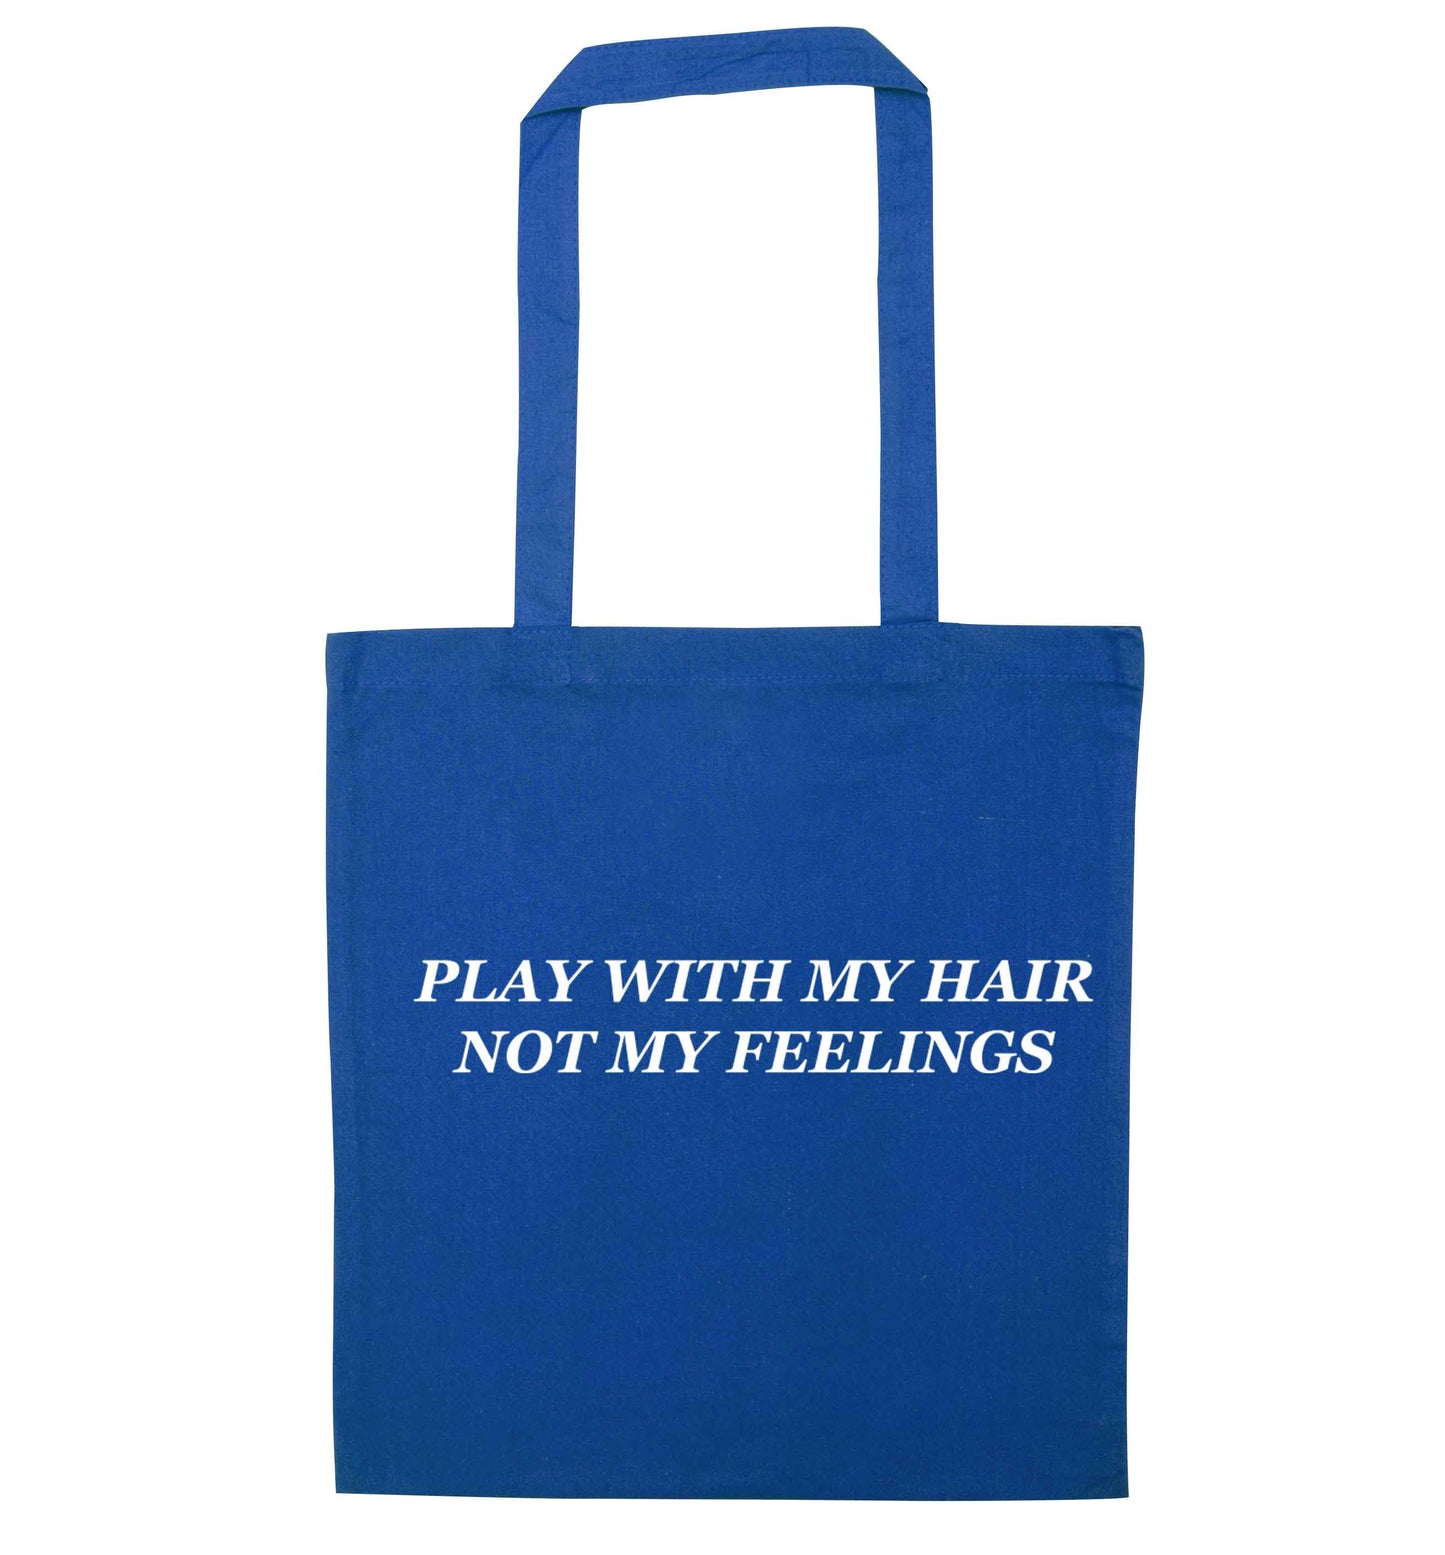 Play with my hair not my feelings blue tote bag